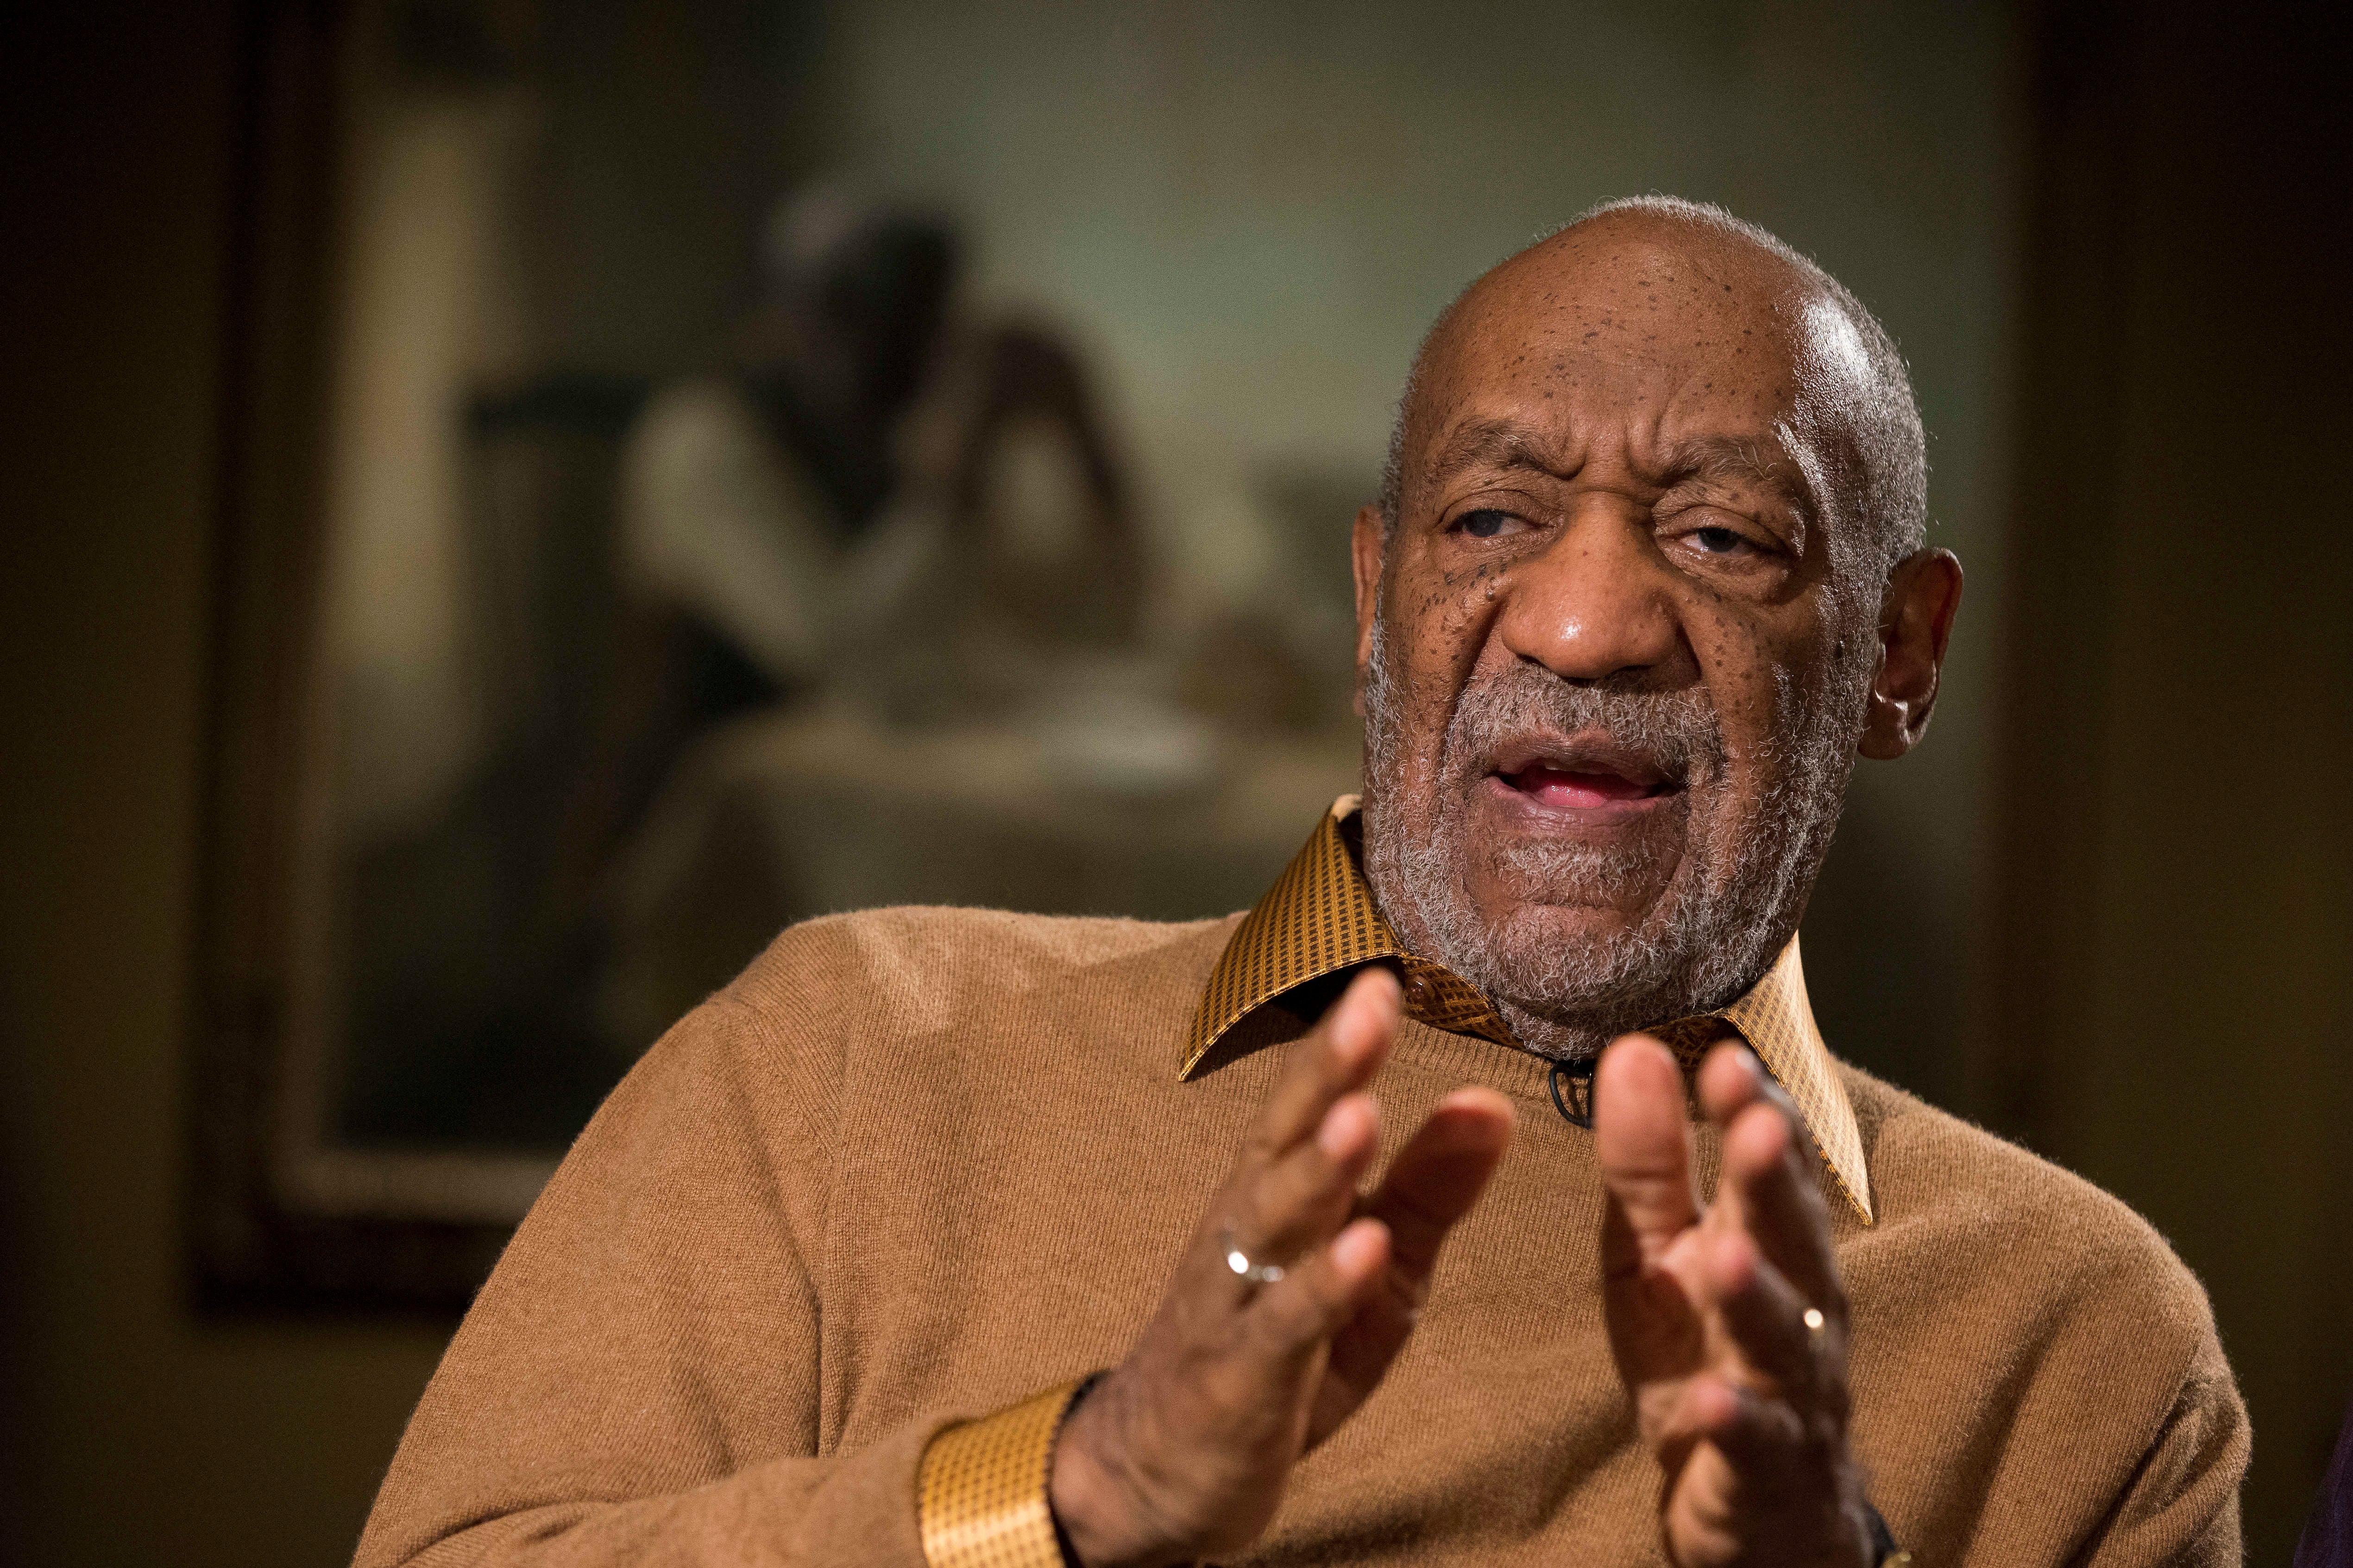  In this Nov. 6, 2014 file photo, Entertainer Bill Cosby gestures during an interview about the upcoming exhibit, Conversations: African and African-American Artworks in Dialogue, at the Smithsonian's National Museum of African Art, in Washington. (AP Photo/Evan Vucci) 